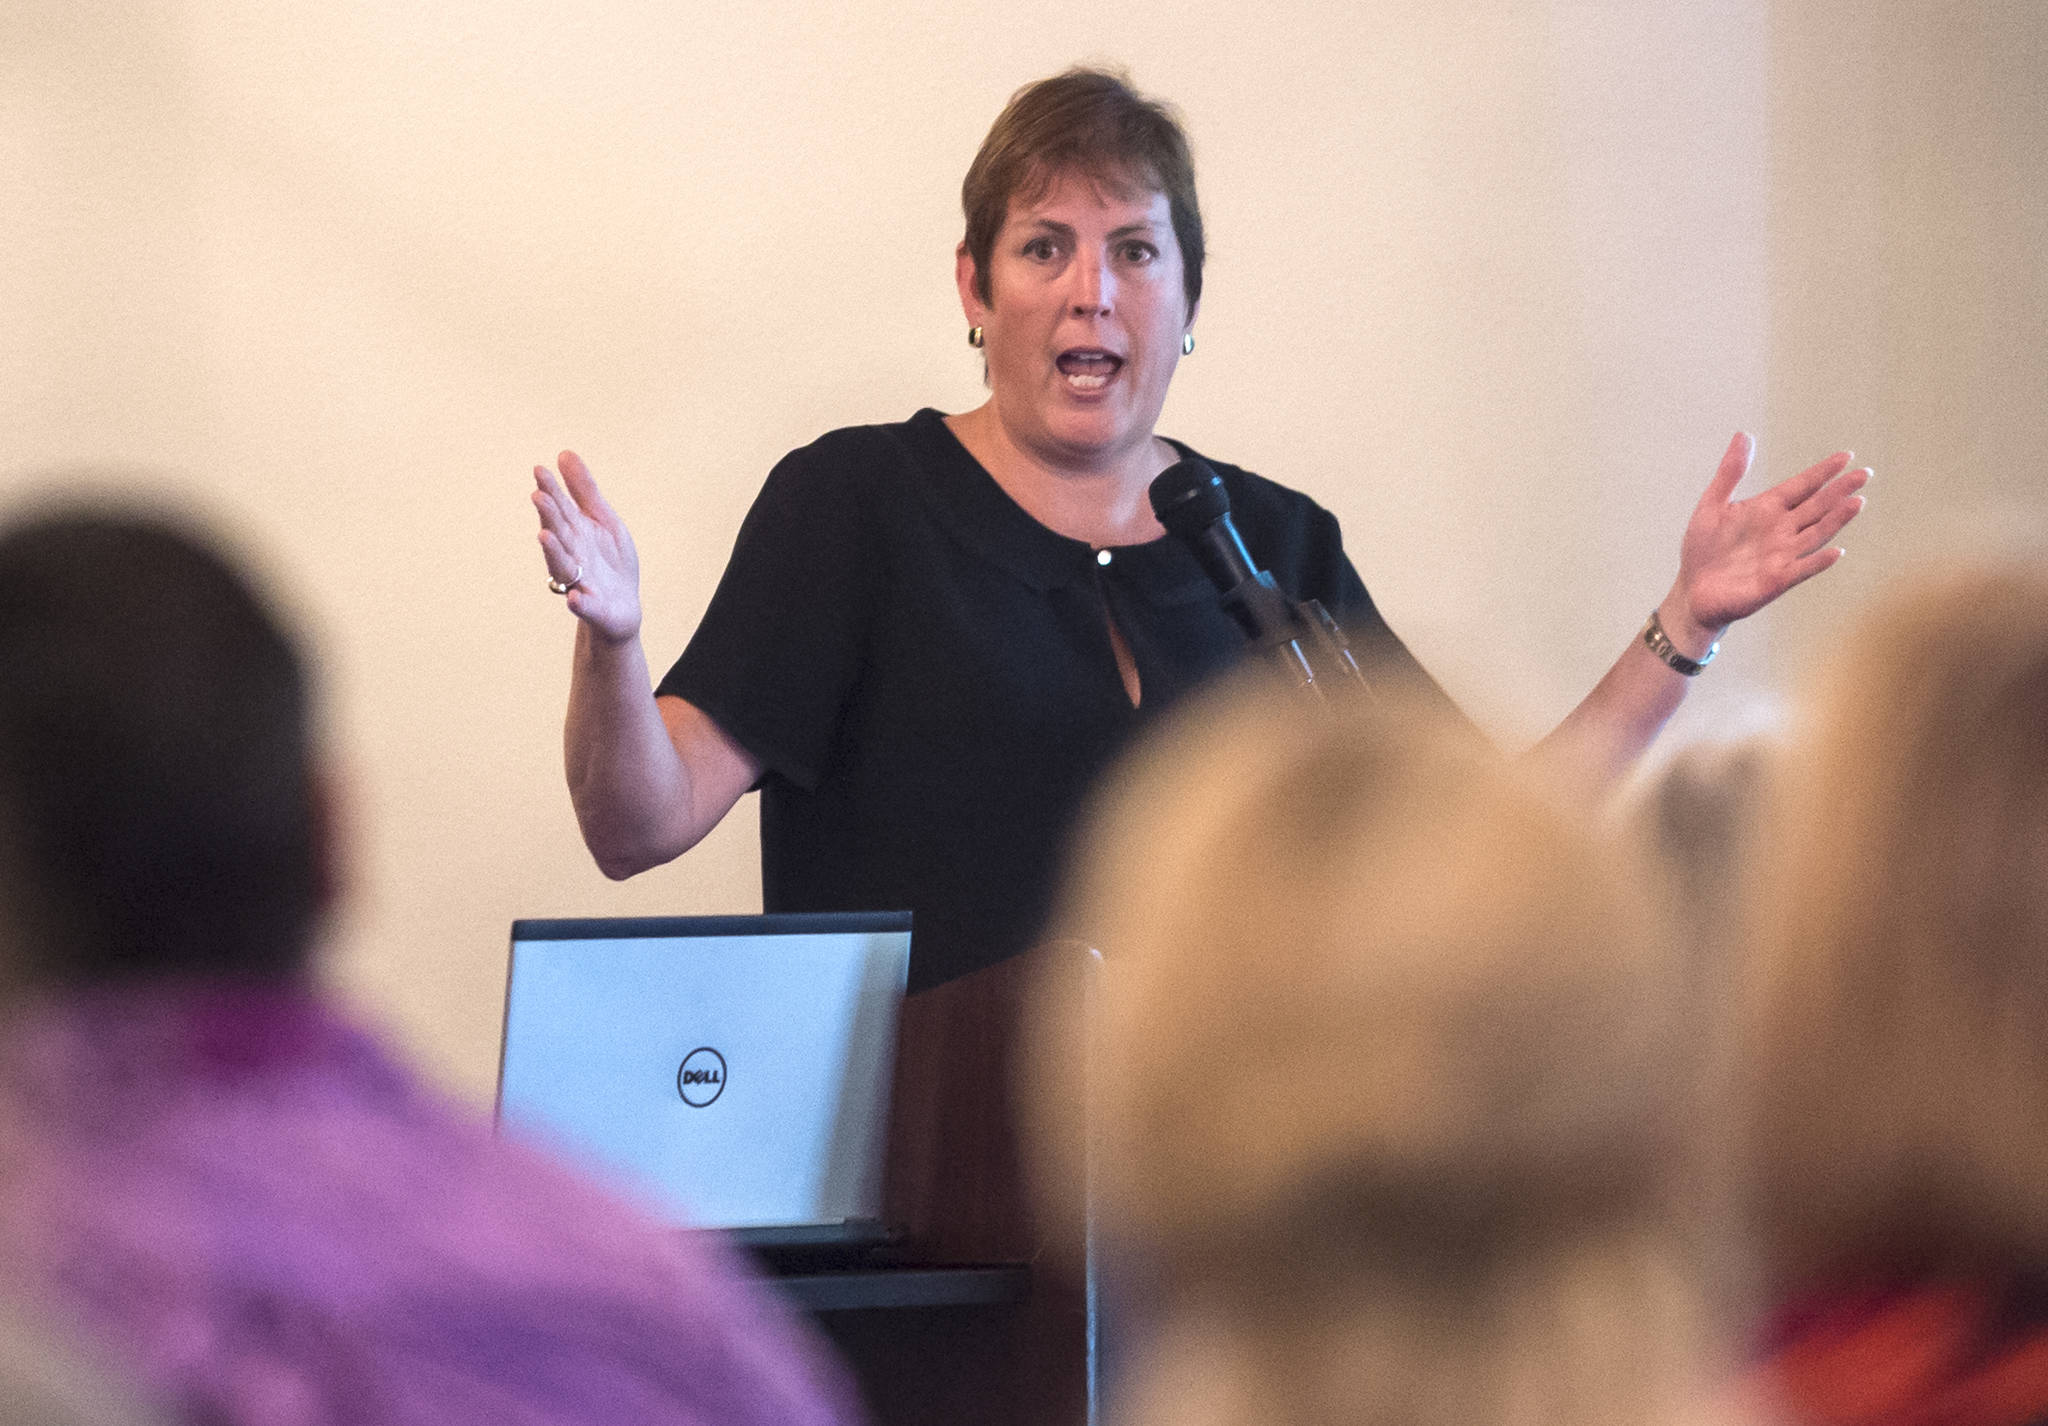 Angela Rodell, Executive Director of the Alaska Permanent Fund Corporation, speaks to the Juneau Chamber of Commerce during their weekly luncheon at the Moose Lodge on Thursday, July 26, 2018. (Michael Penn | Juneau Empire)